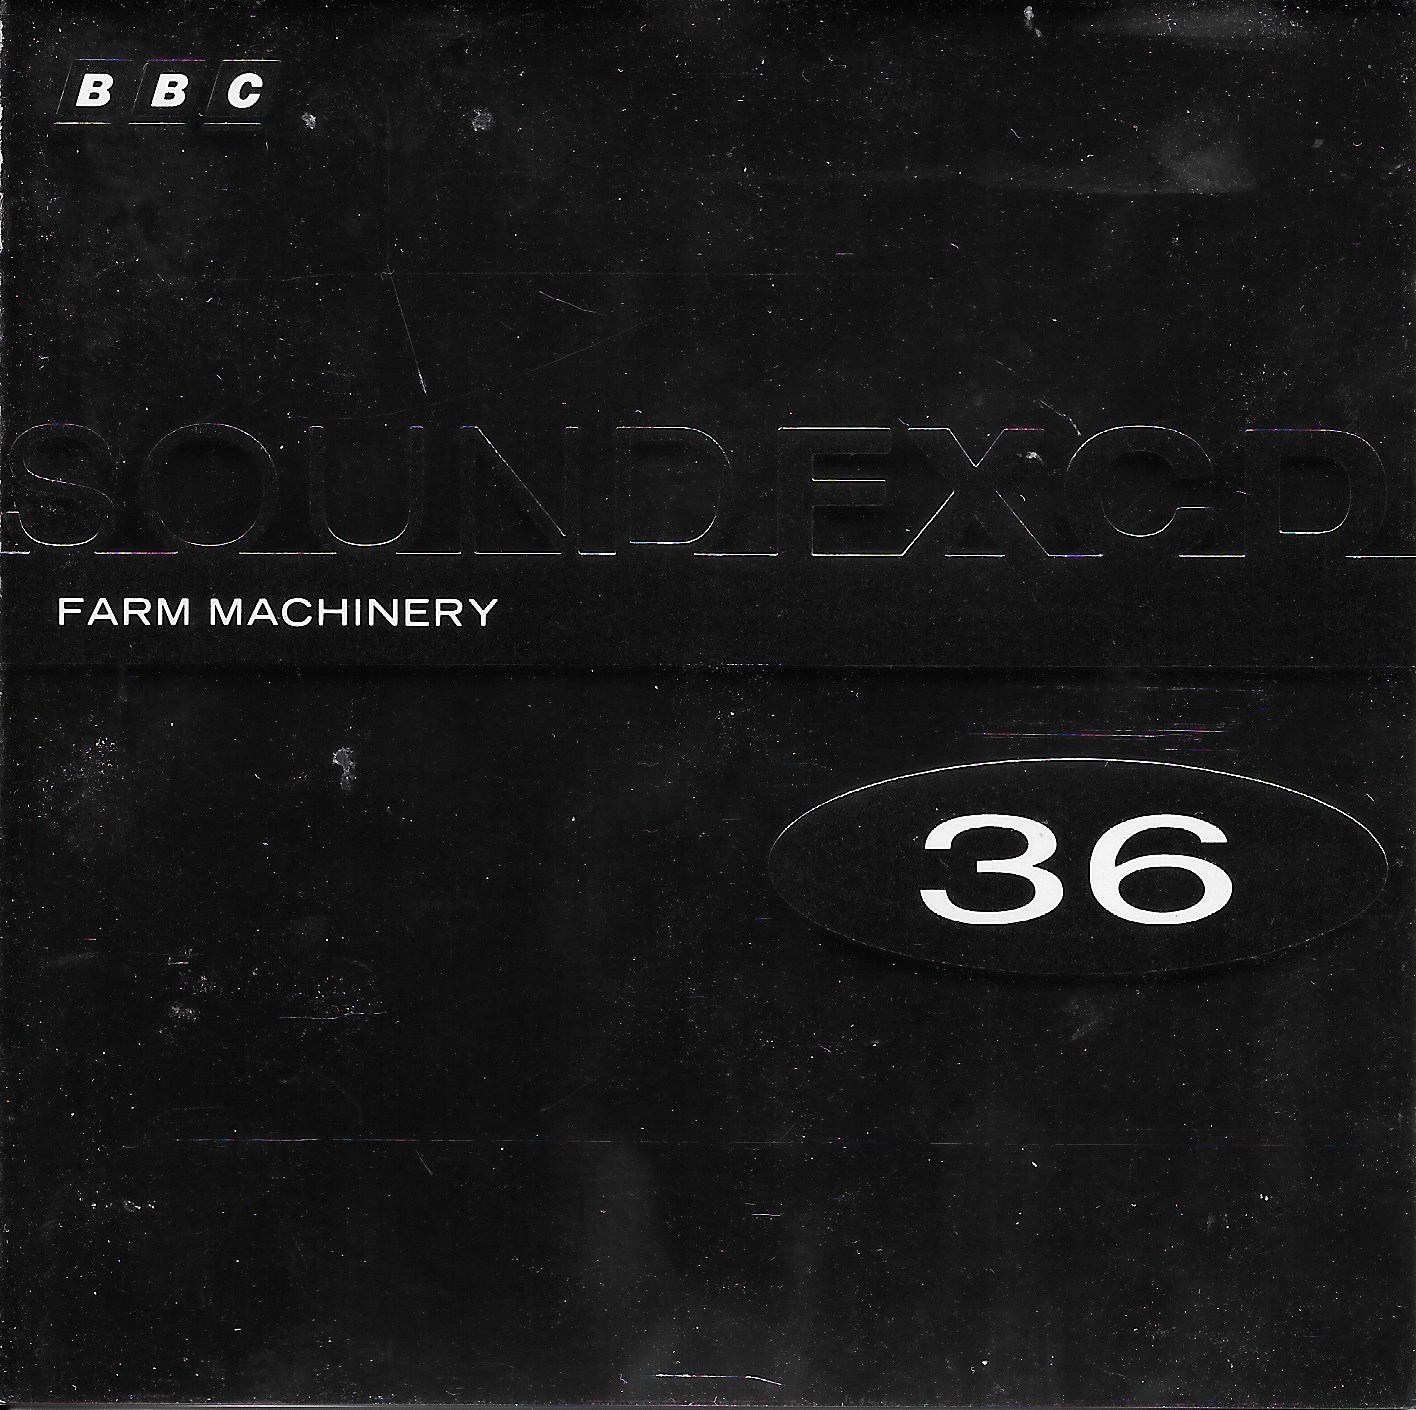 Picture of BBCCD SFX036 Farm machinery by artist Various from the BBC records and Tapes library